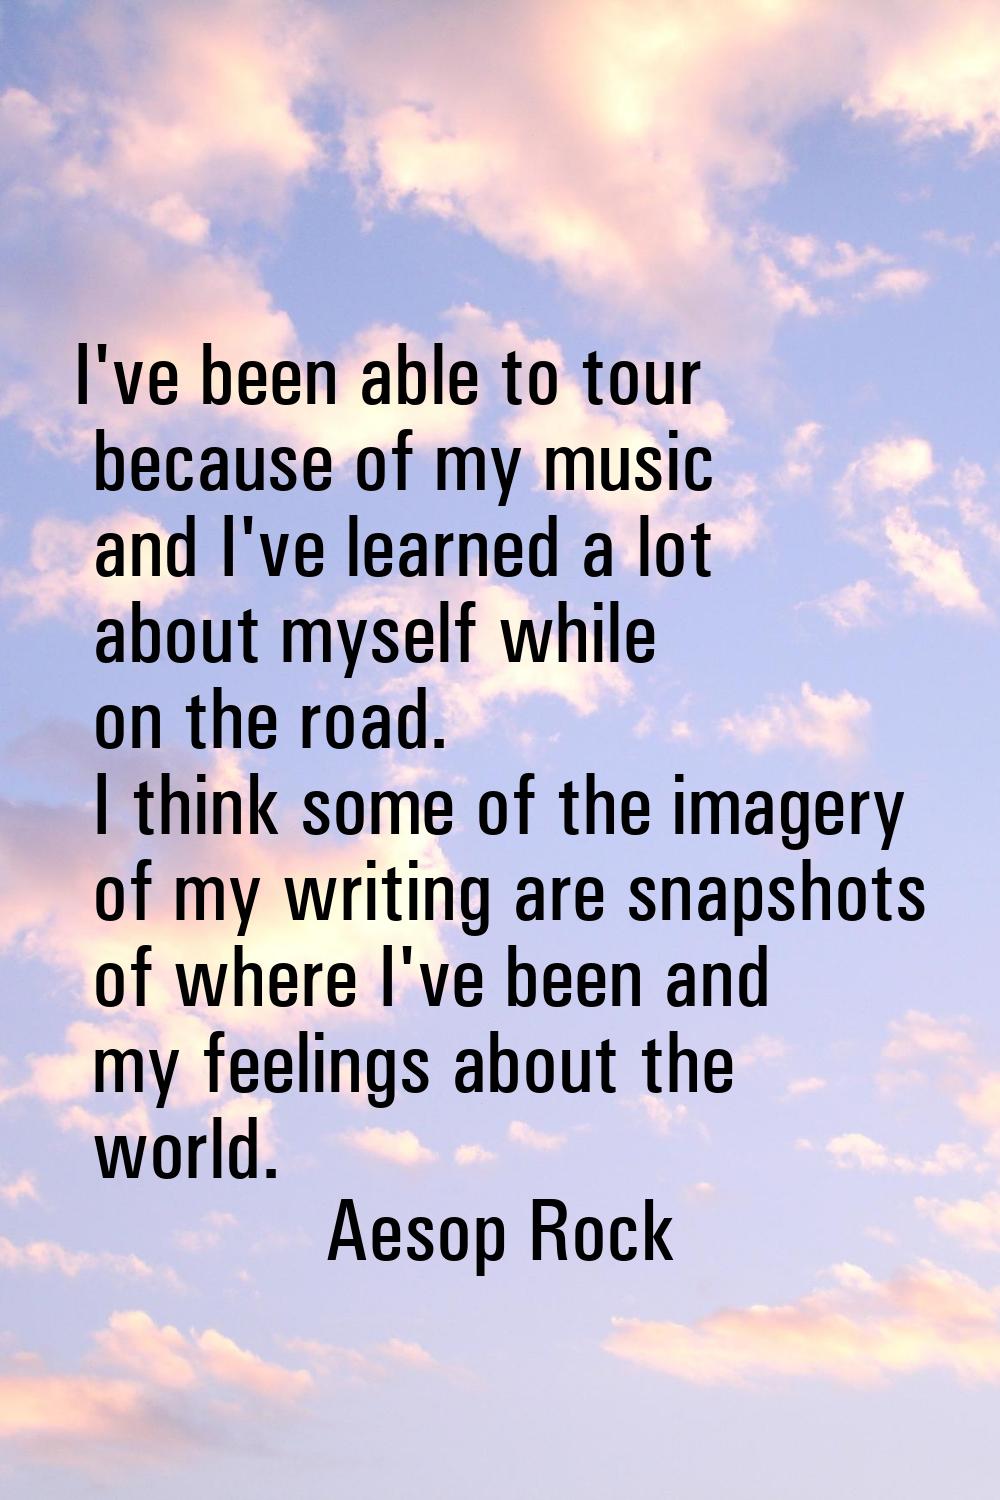 I've been able to tour because of my music and I've learned a lot about myself while on the road. I